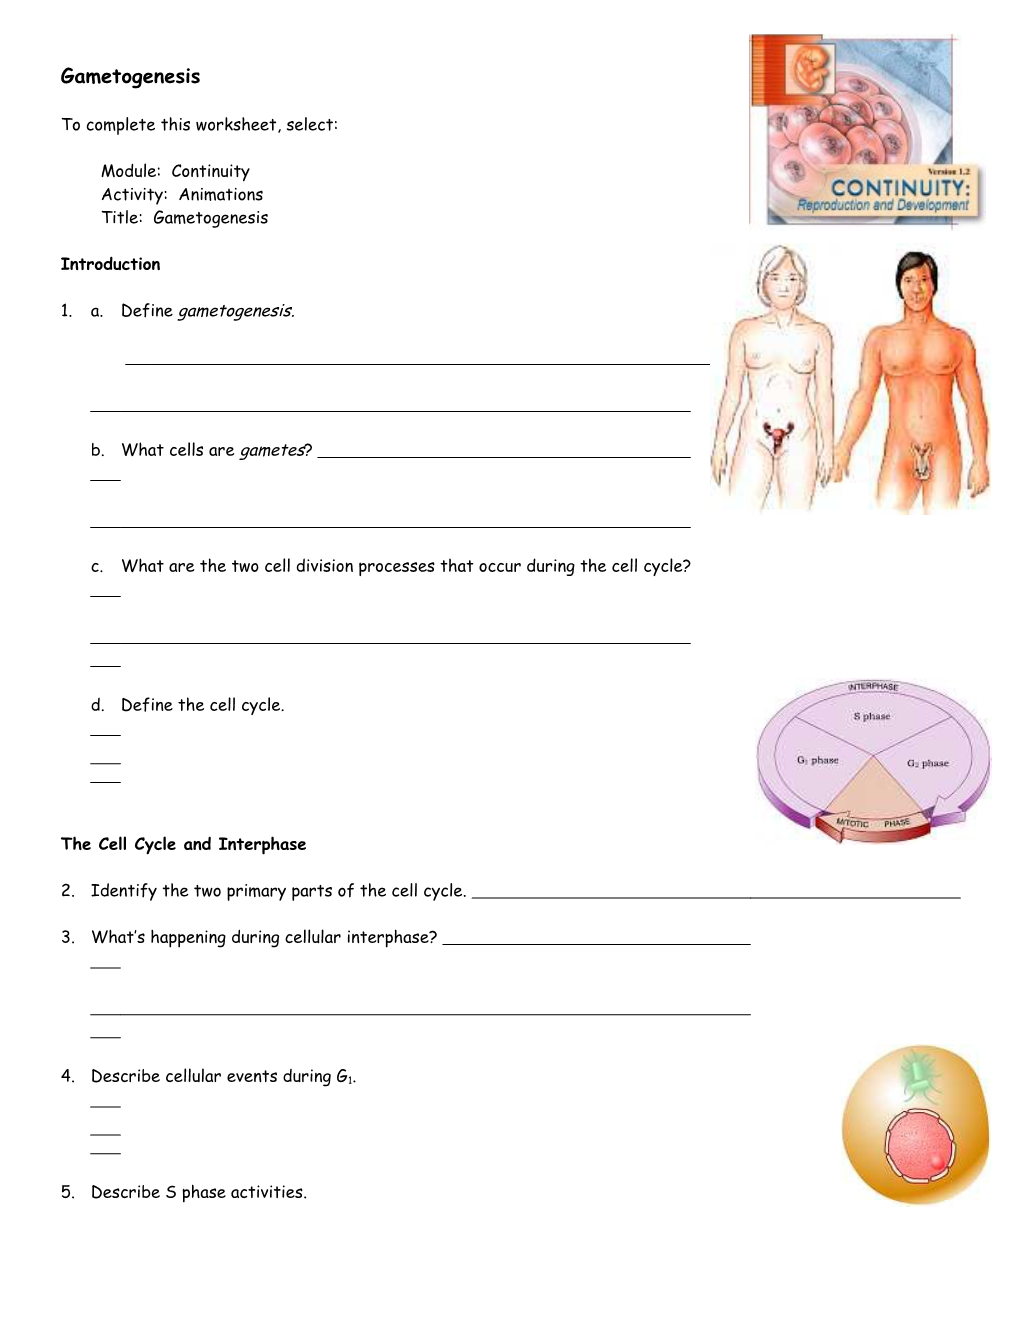 Endocrine System: Overview s8